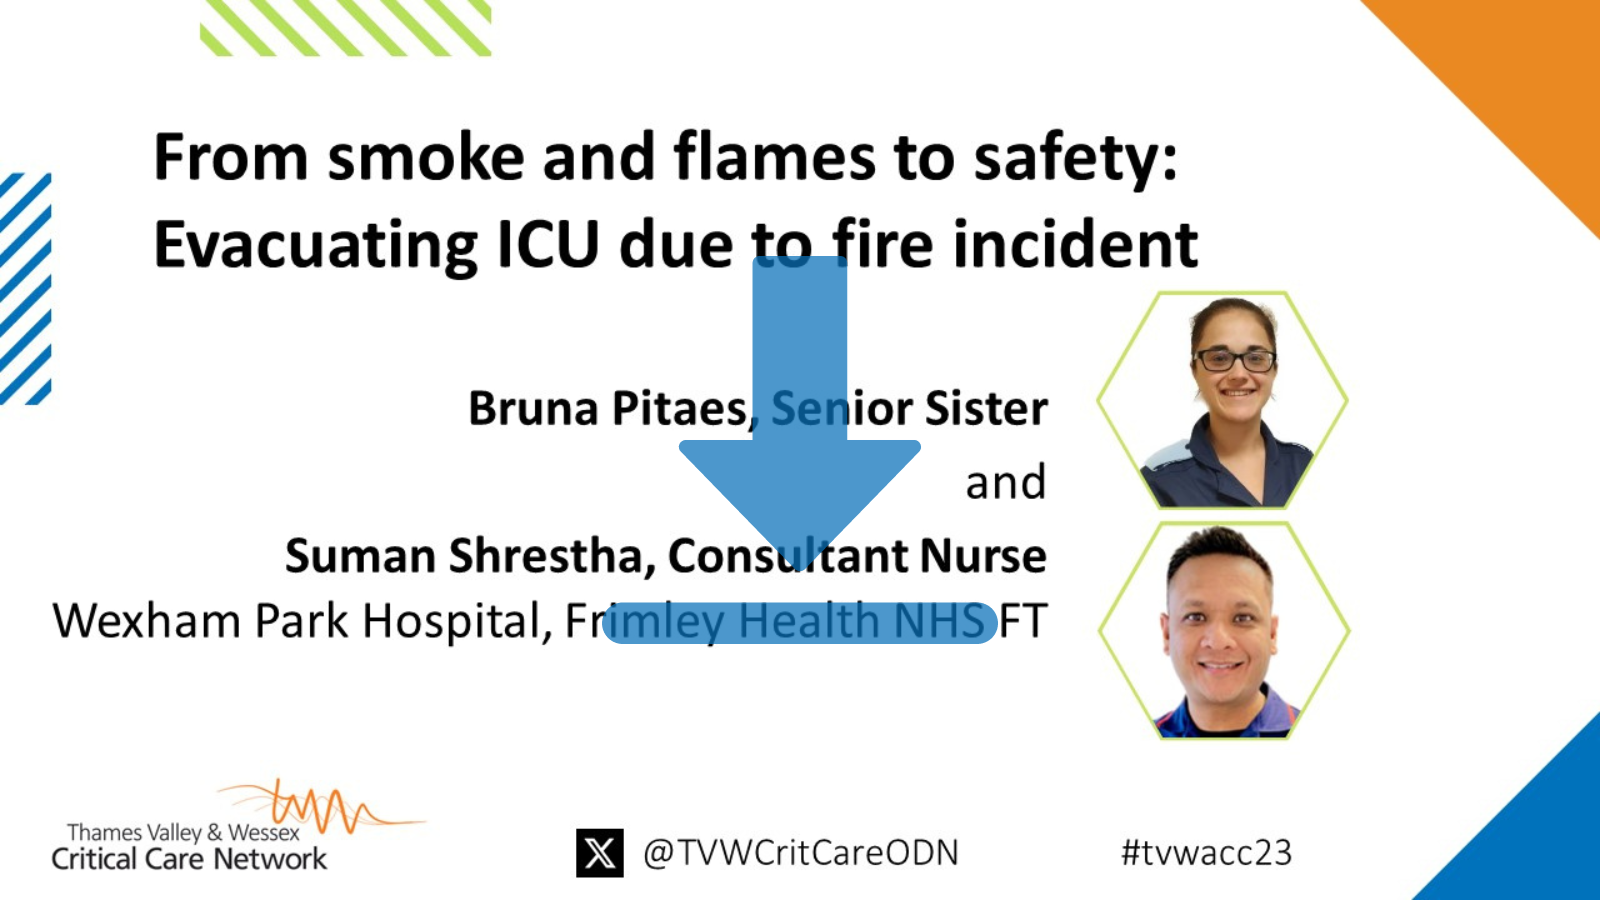 From smoke and flames to safety: Evacuating ICU due to fire incident